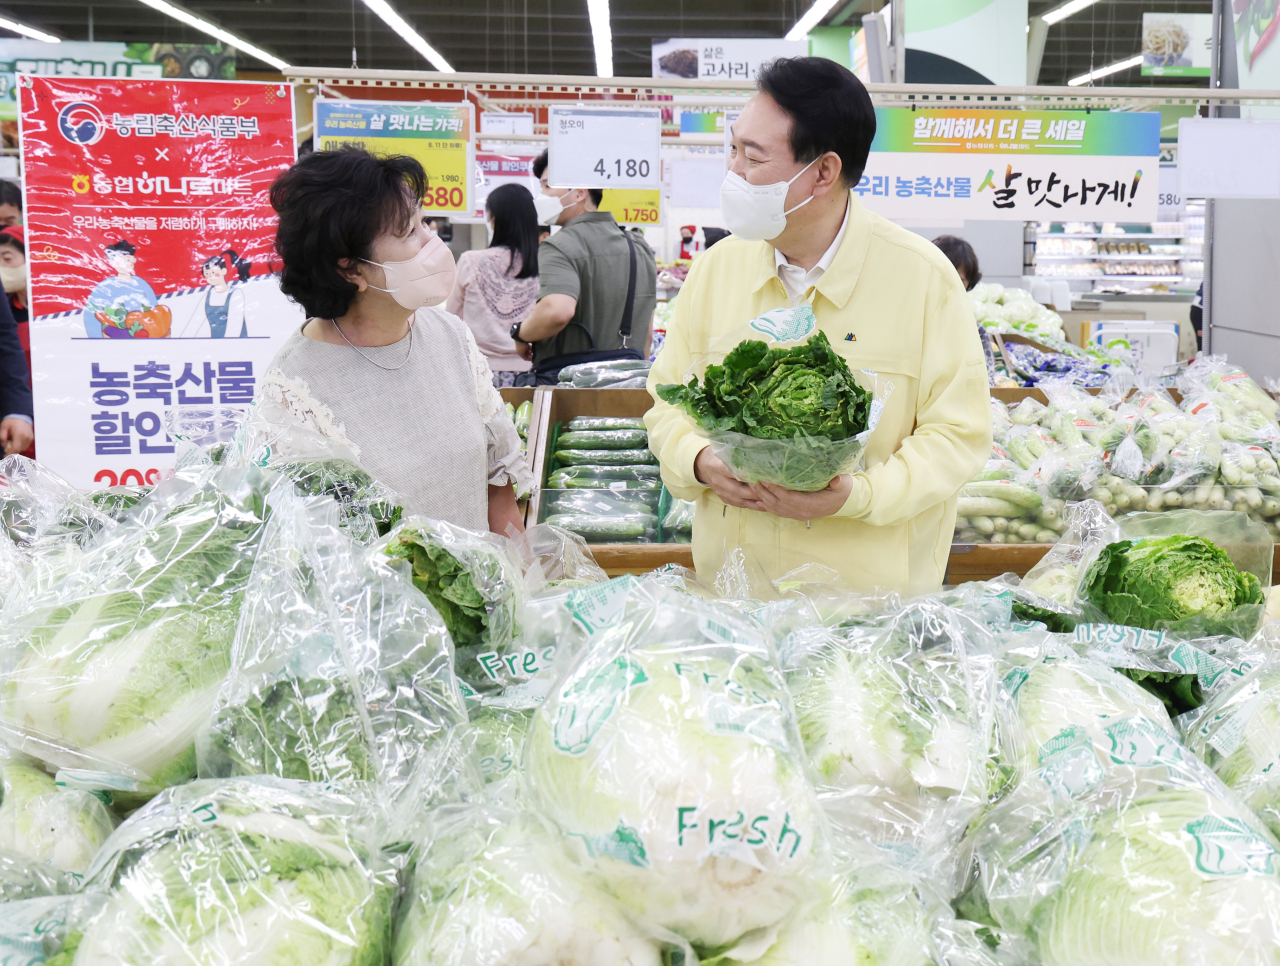 President Yoon Suk-yeol (right) talks with a citizen during his visit to a large discount chain in Seoul on Thursday to map out policies to tame inflation. (Yonhap)